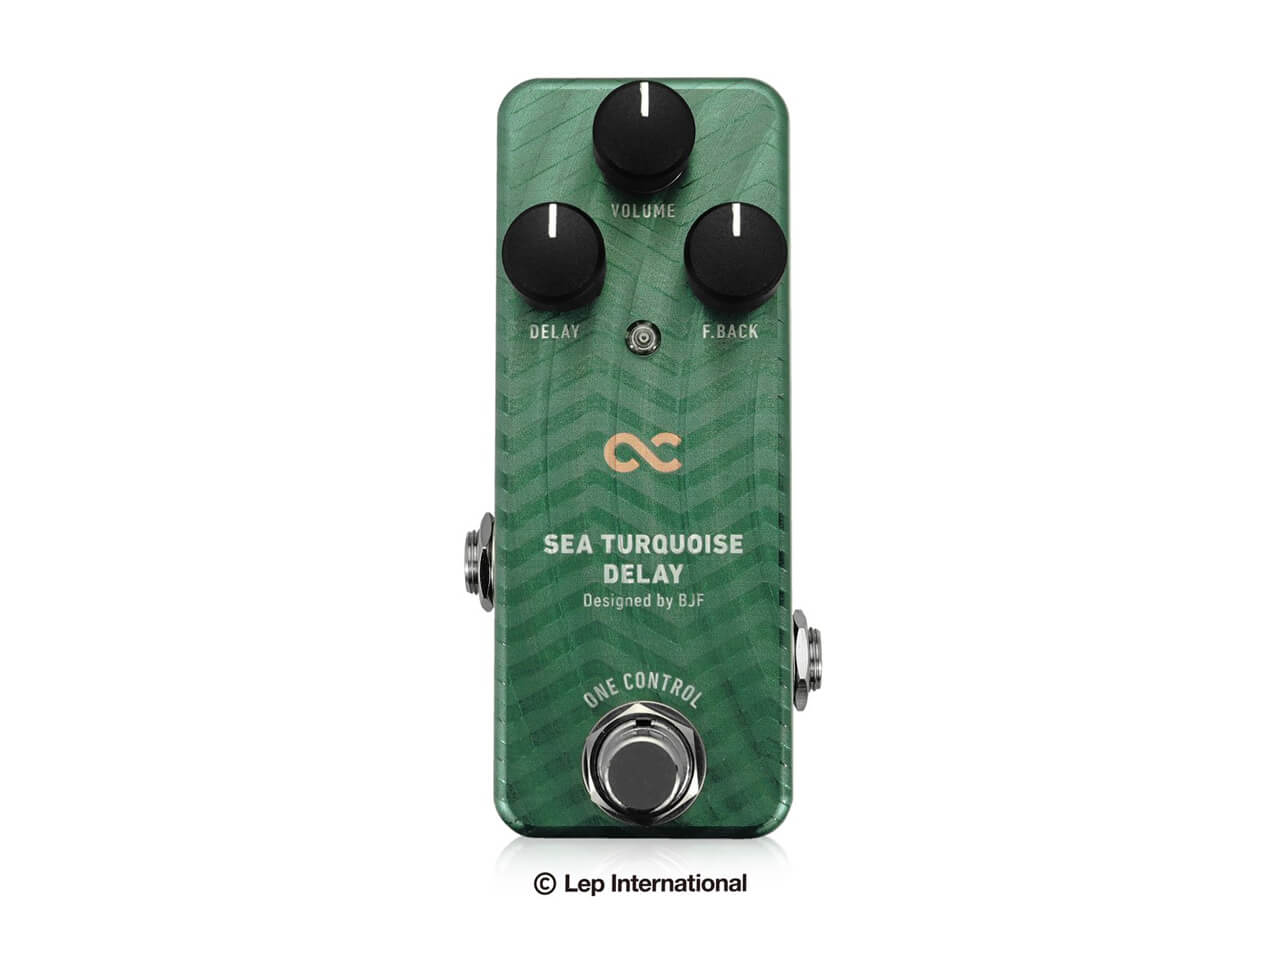 One Control Sea Turquoise Delay<br>(ディレイ)(ワンコントロール) 駅前店